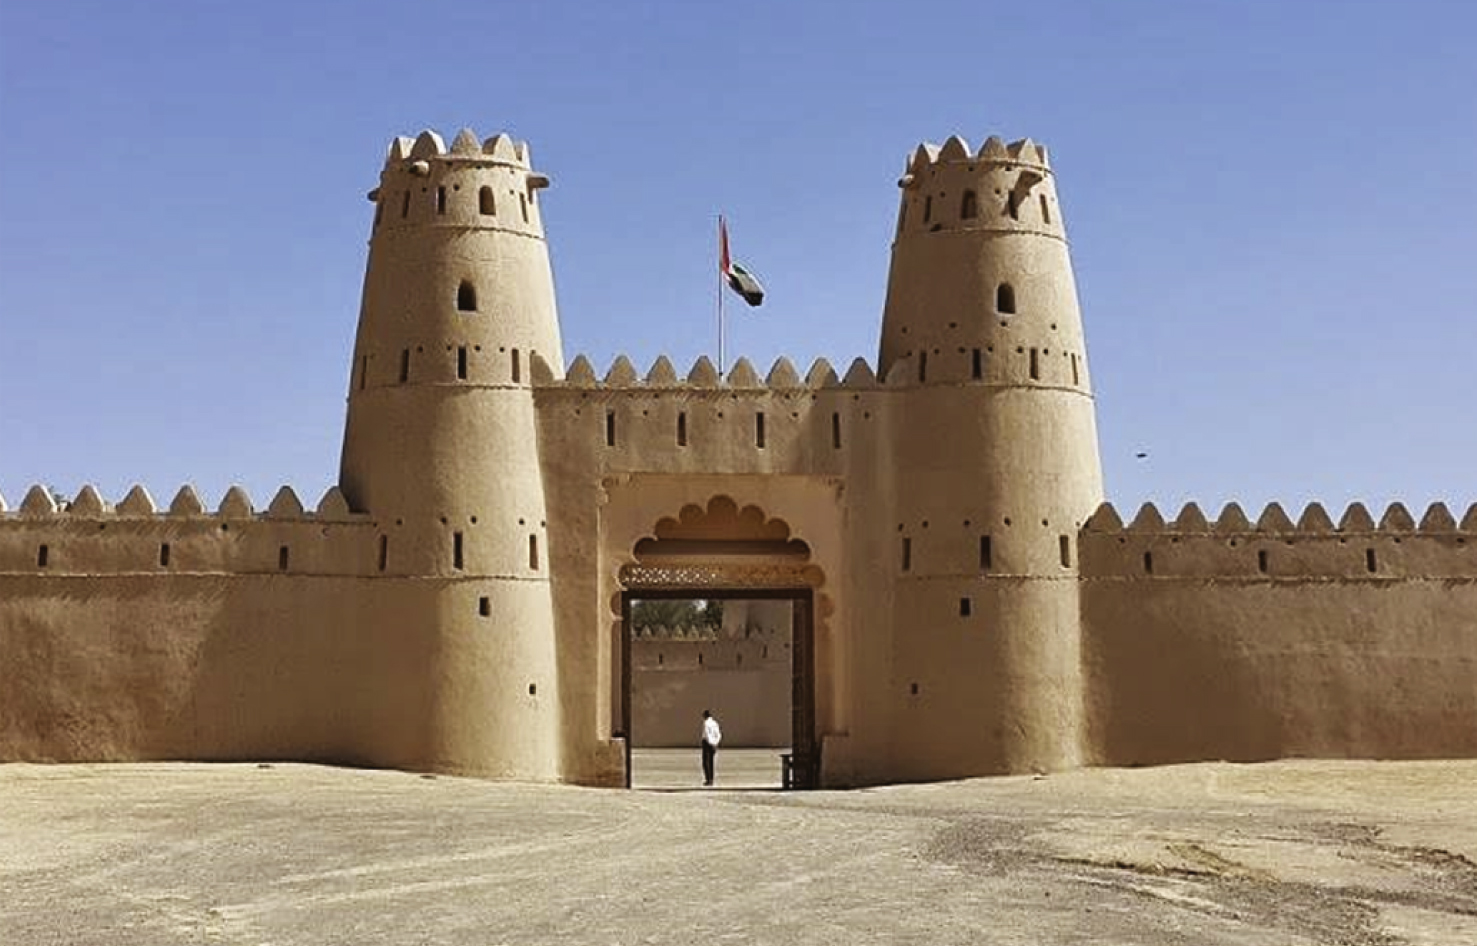 The Al-Jahili Fort demonstrates local building traditions.